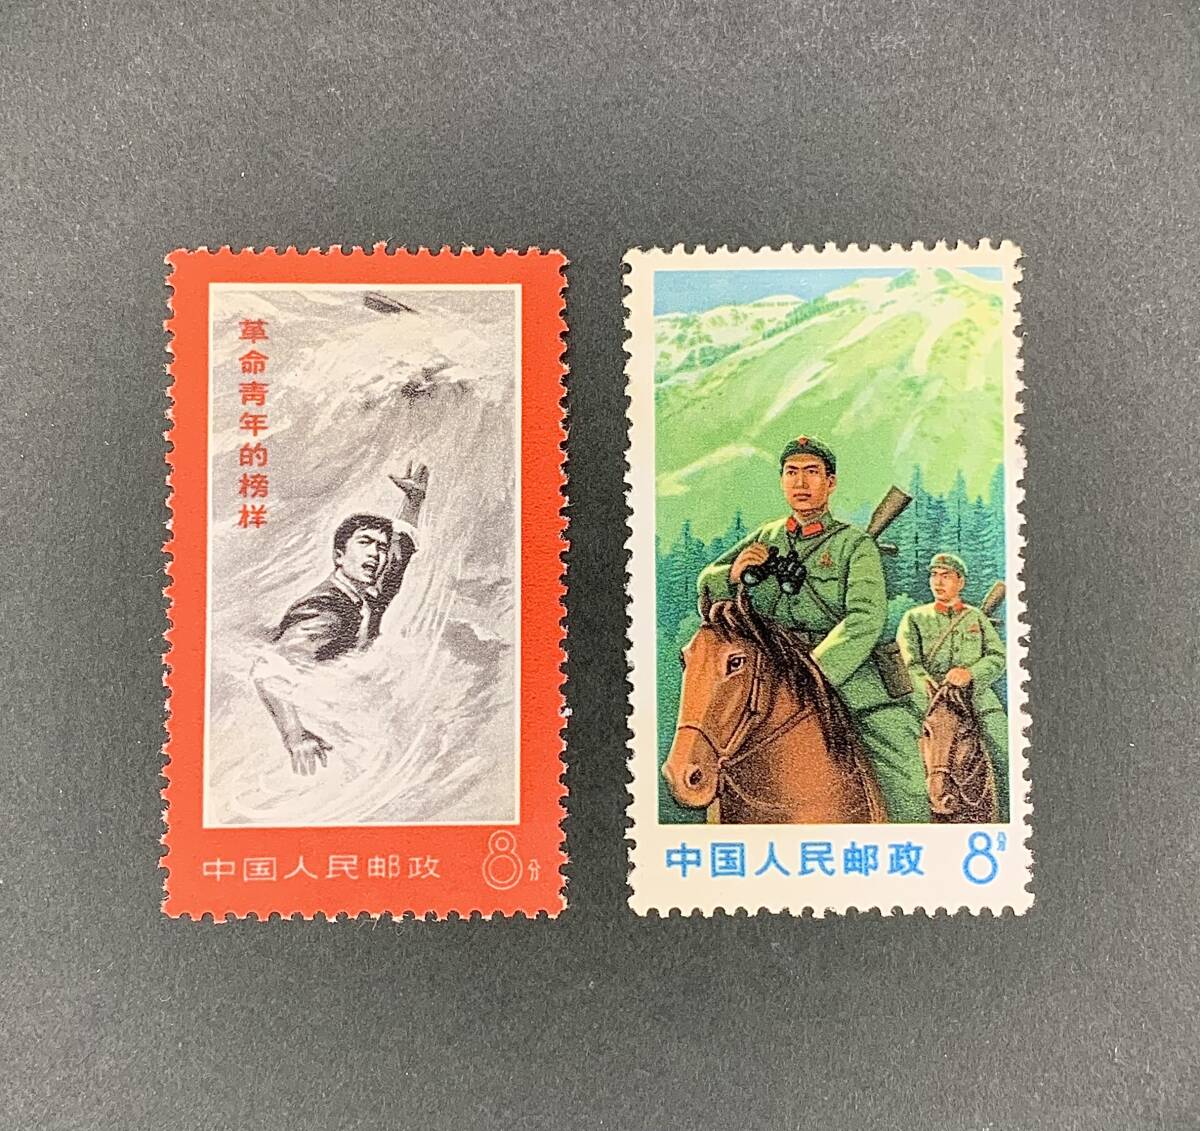  China stamp * unused * writing 19/ writing 20 revolution youth. .. side ....1970 year all sorts .